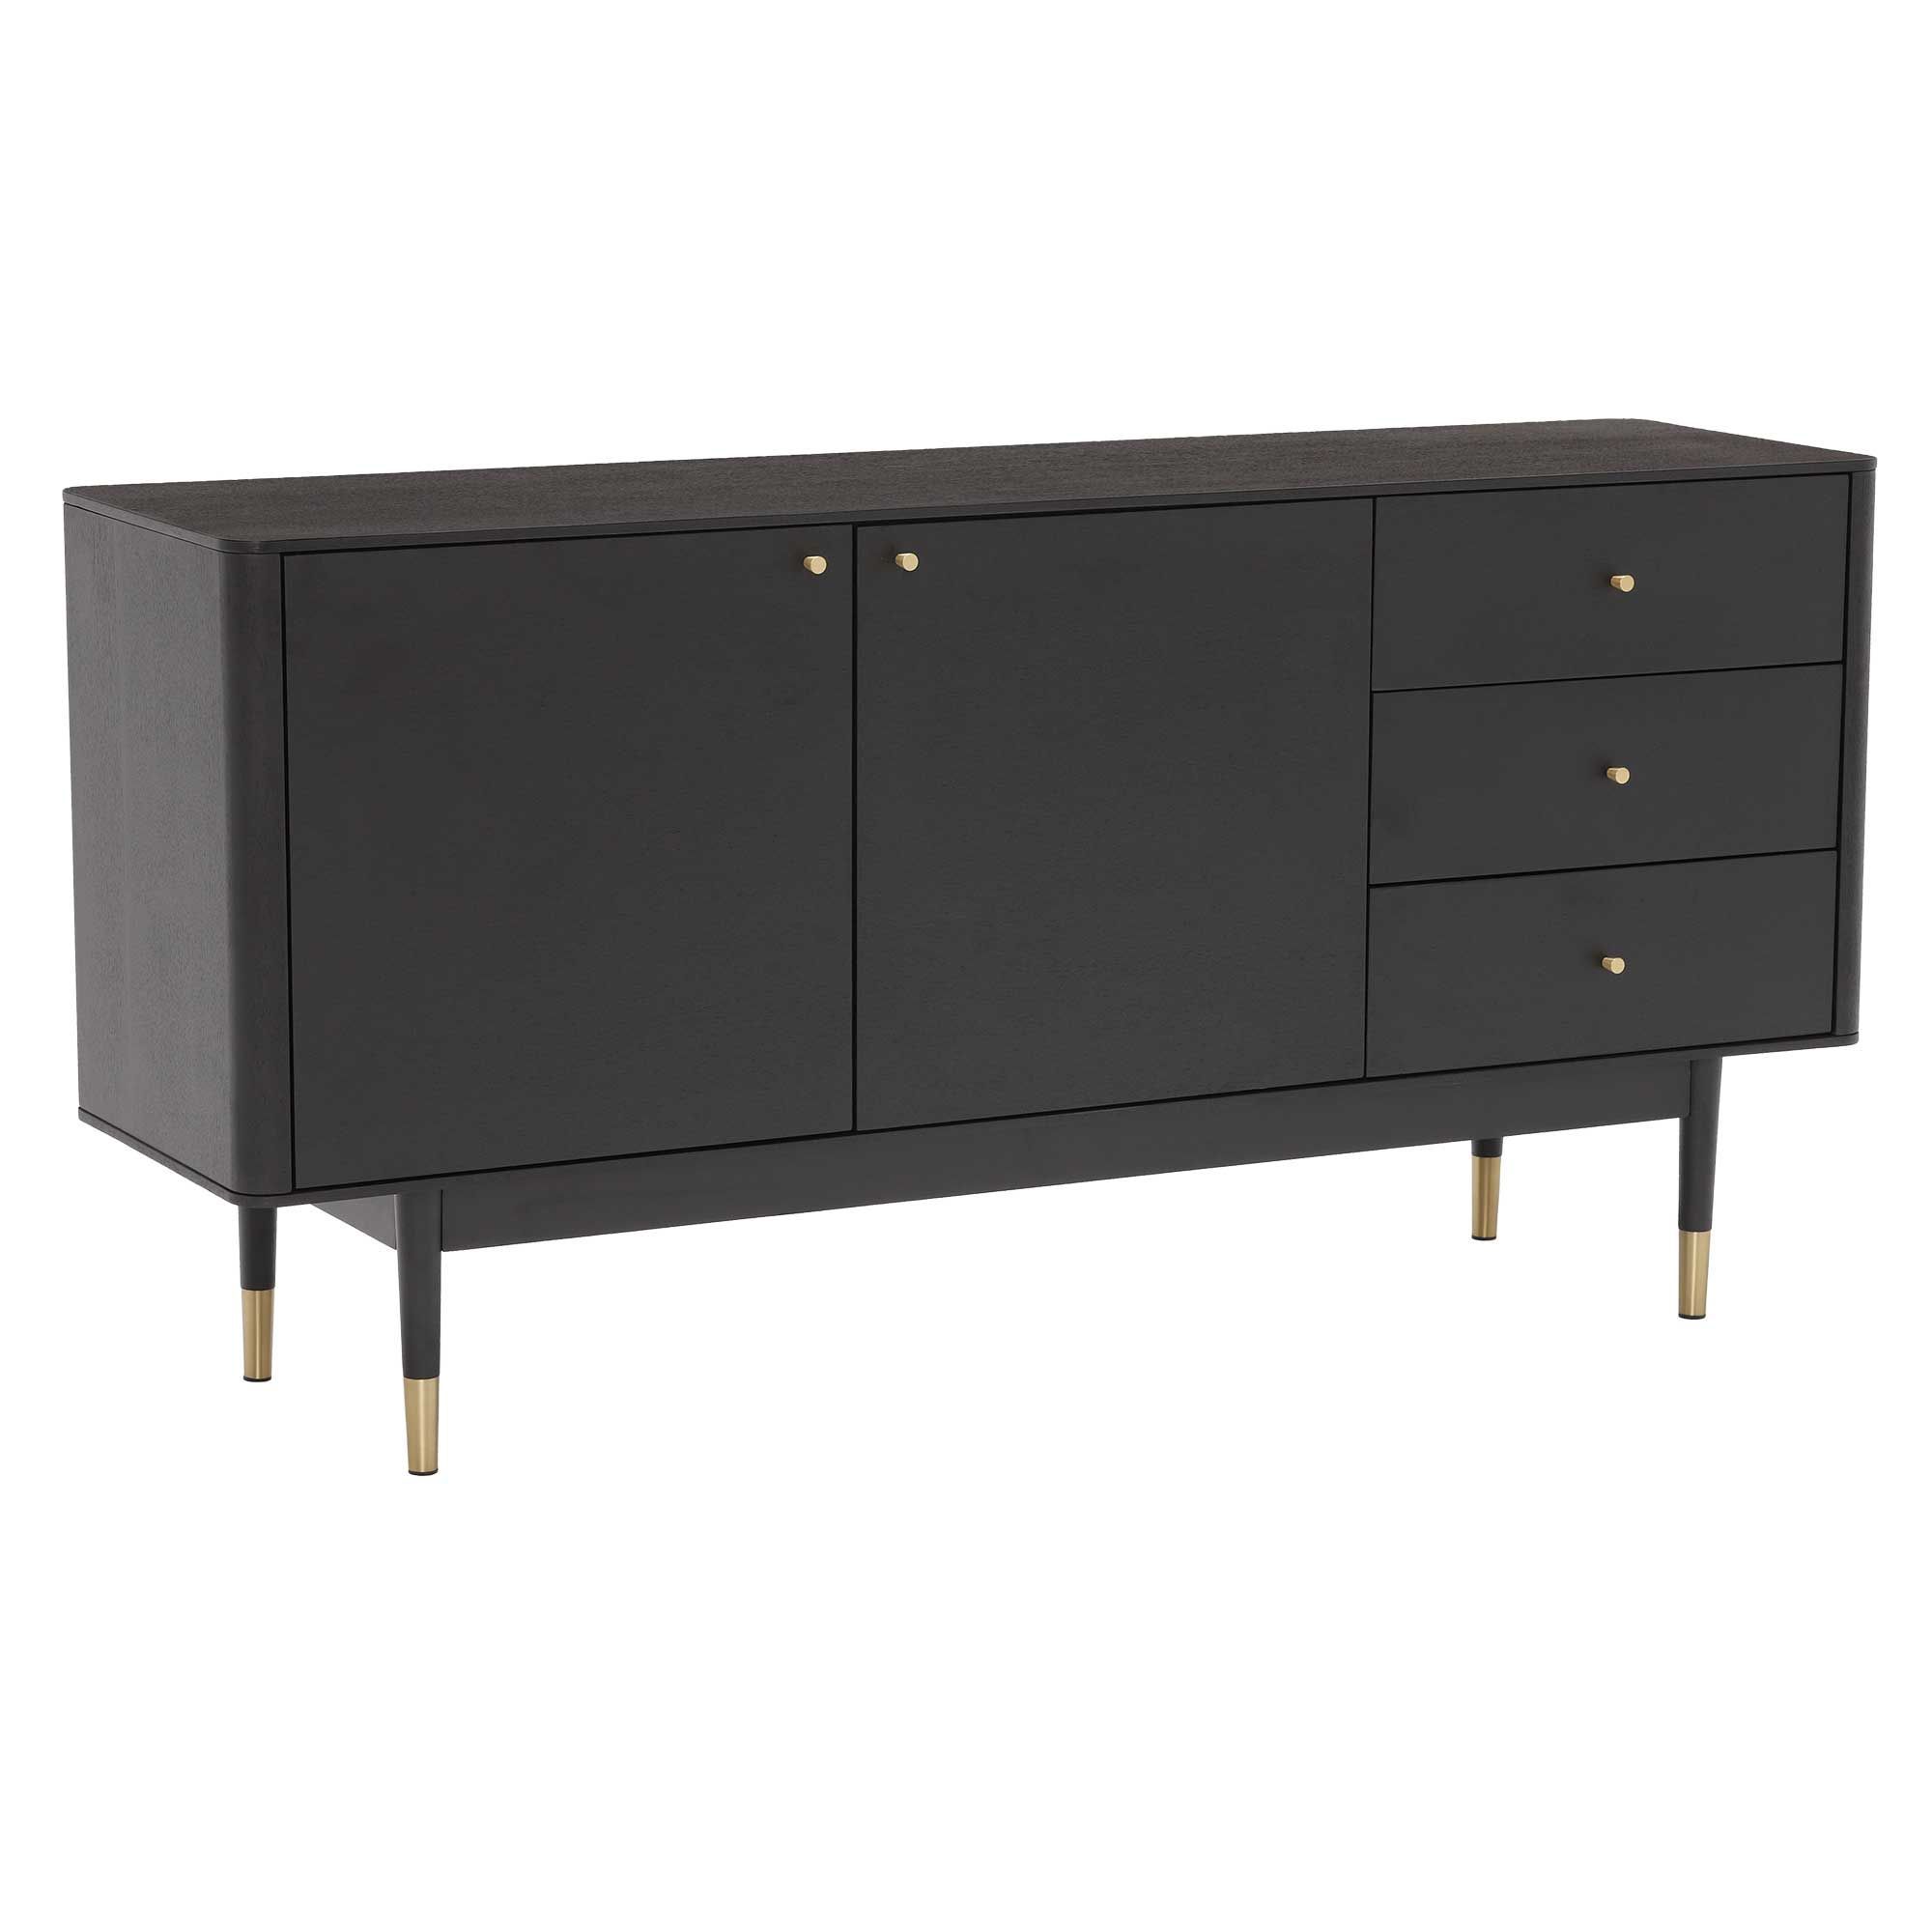 Cannelle Black Sideboard, Black Ash & Gold – Barker Regarding Contemporary Wooden Buffets With Four Open Compartments And Metal Tapered Legs (View 2 of 30)